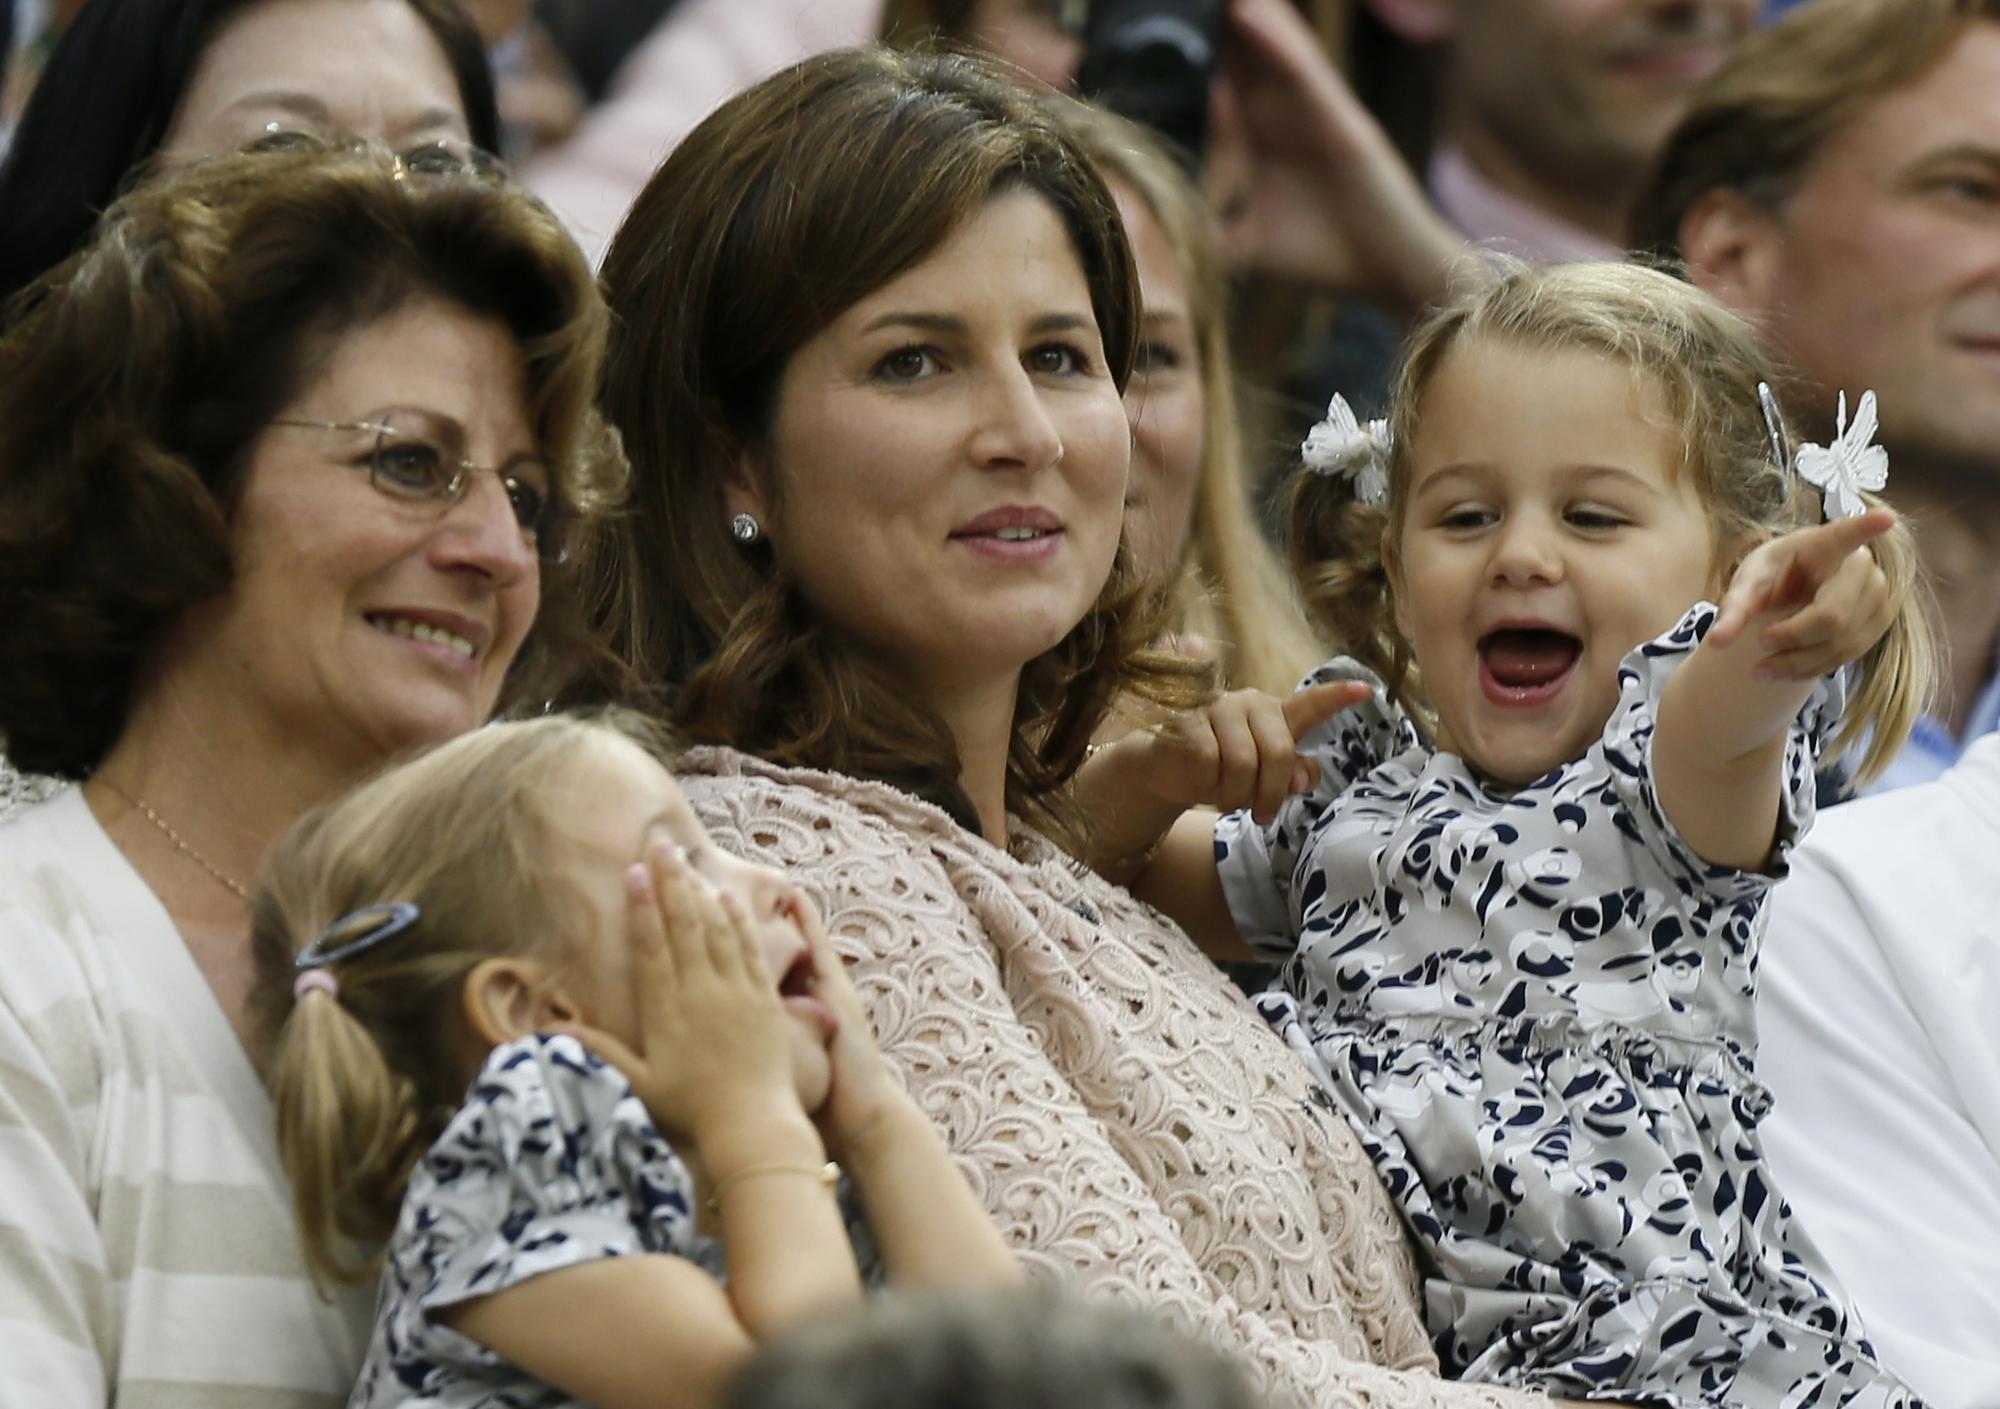 The wife of Roger Federer of Switzerland, Mirka Federer (C) with their two-year-old twins Charlene Riva and Myla Rose, celebrates after Federer defeated Andy Murray of Britain in their men's singles final tennis match at the Wimbledon Tennis Championships in London July 8, 2012. REUTERS/Stefan Wermuth (BRITAIN - Tags: ENTERTAINMENT SOCIETY SPORT TENNIS) [REUTERS - Stefan Wermuth]